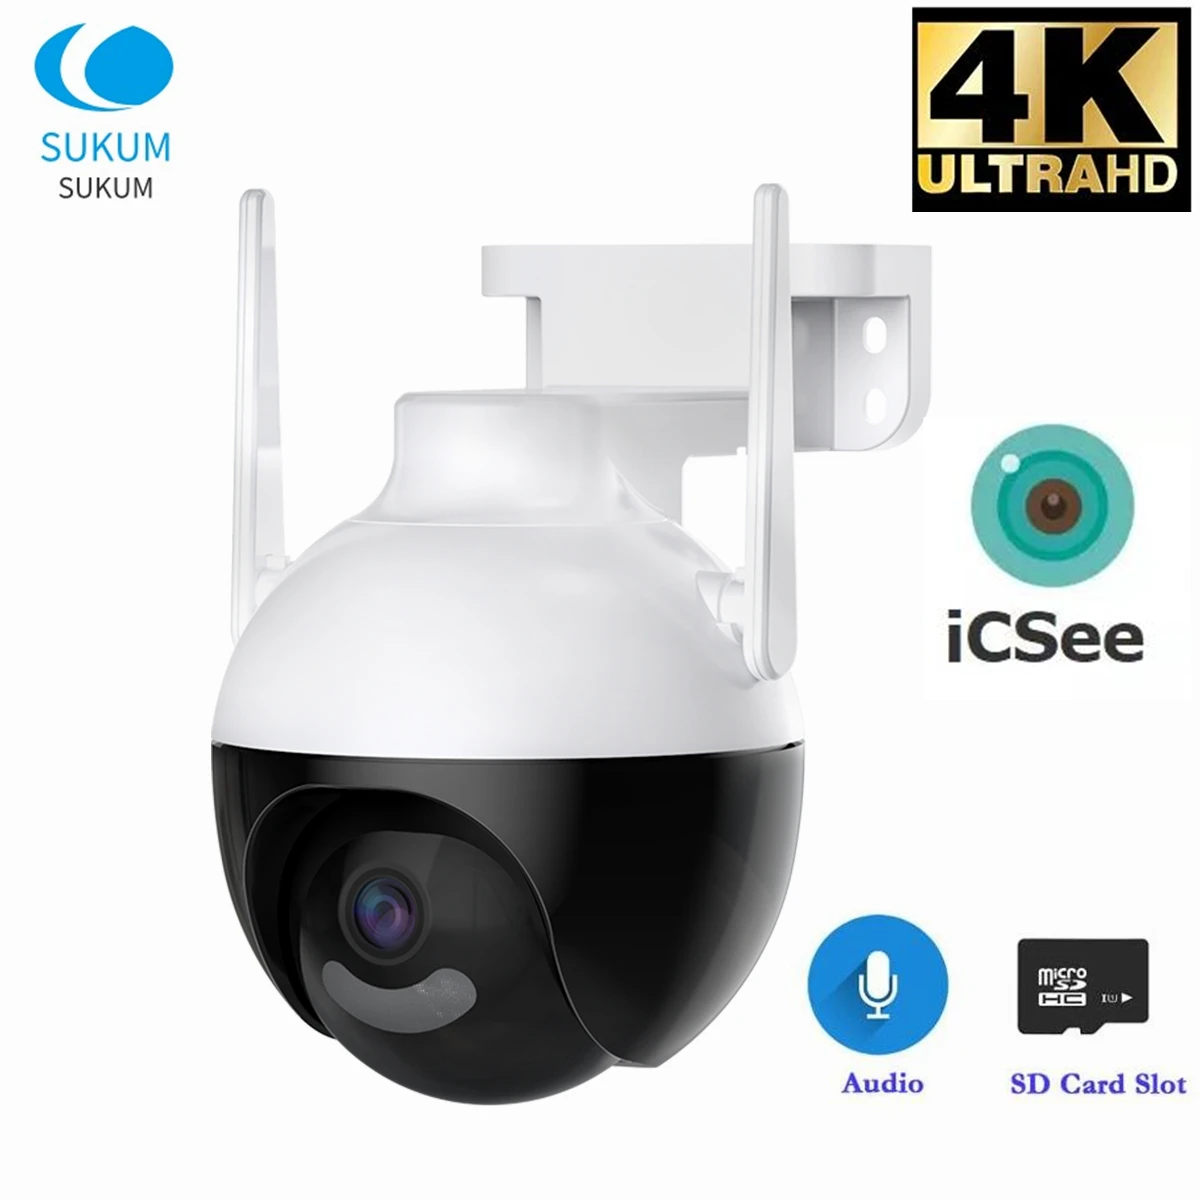 

8MP ICSee WIFI IP Camera Outdoor Two Ways Audio Auto Tracking Security Protection Waterproof Wireless CCTV Camera Speed Dome